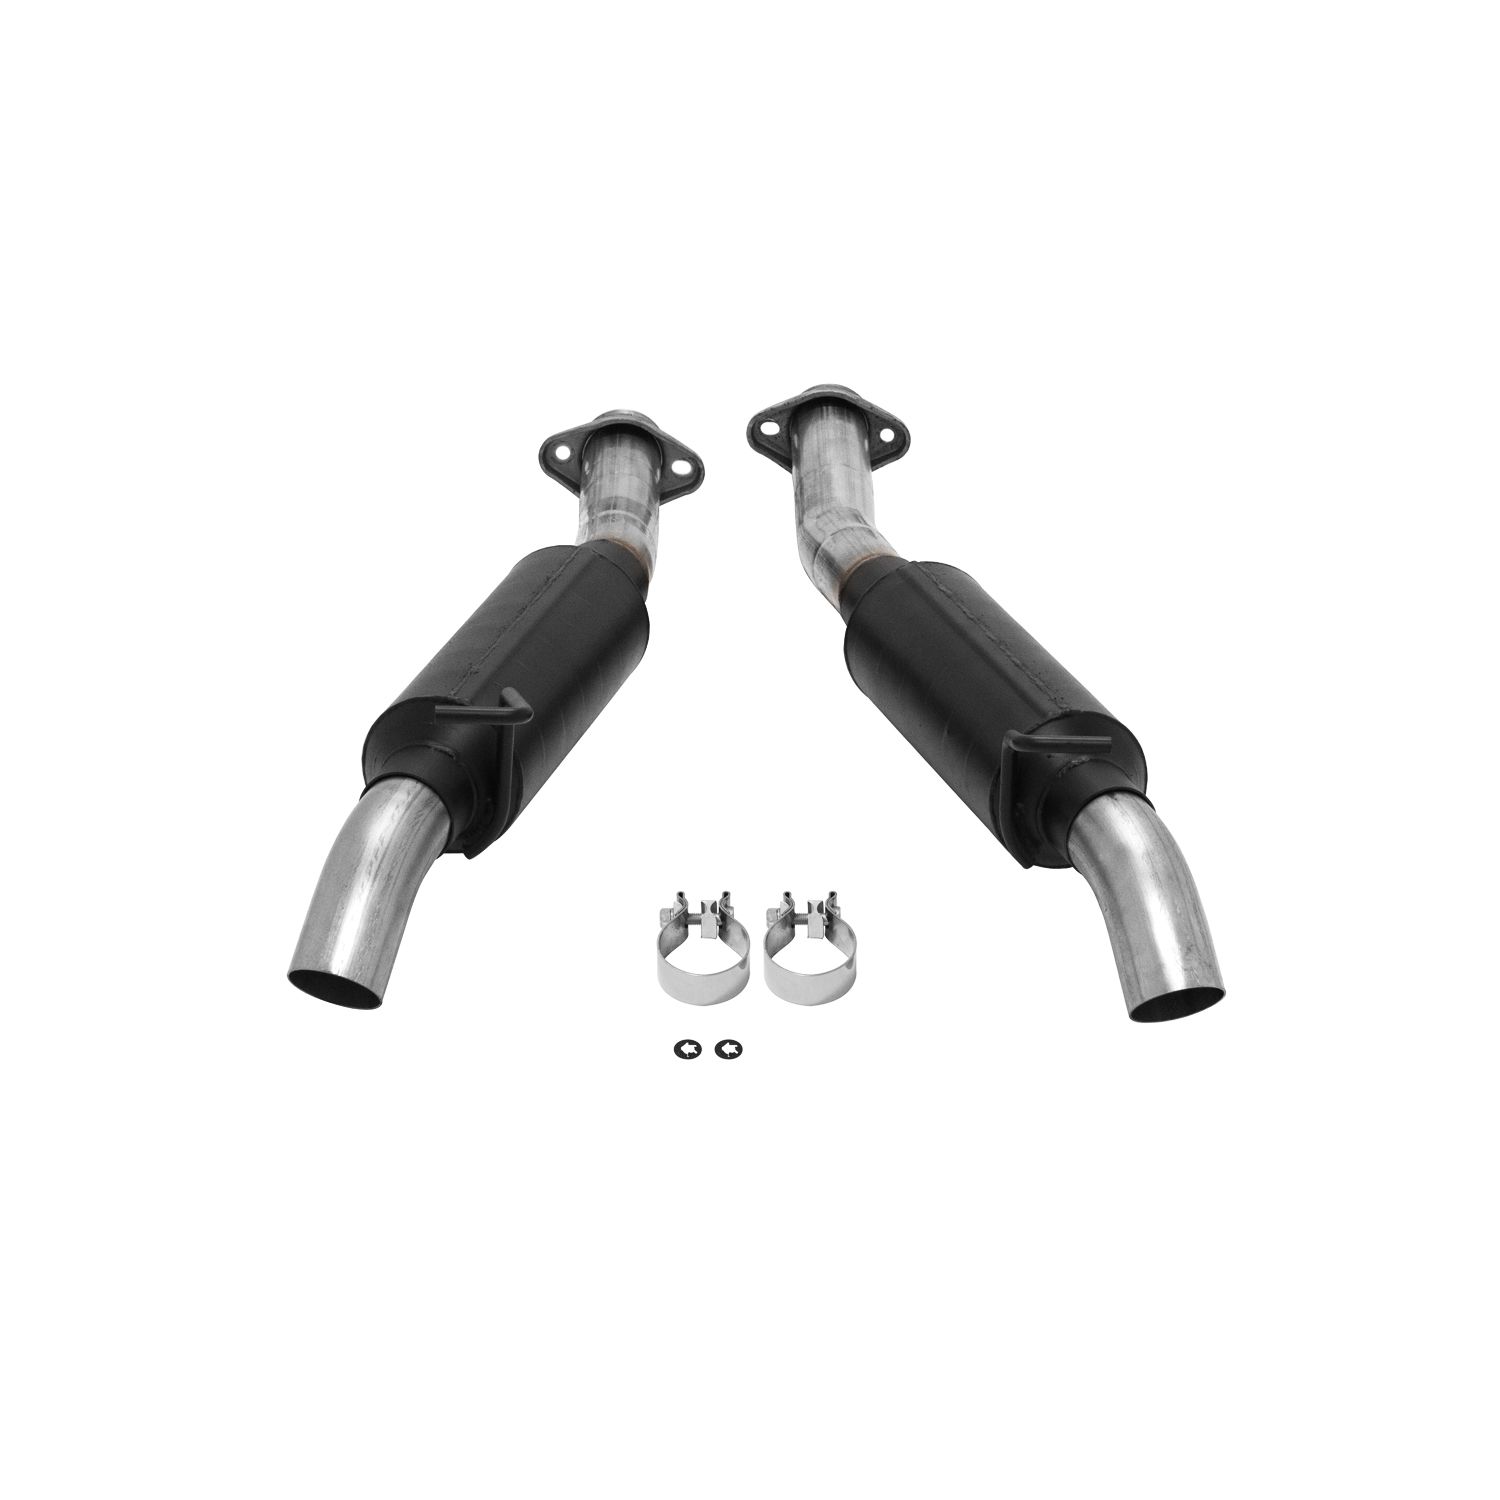 1996-2004 Ford Mustang 4.6L Flowmaster Outlaw Cat-Back Exhaust